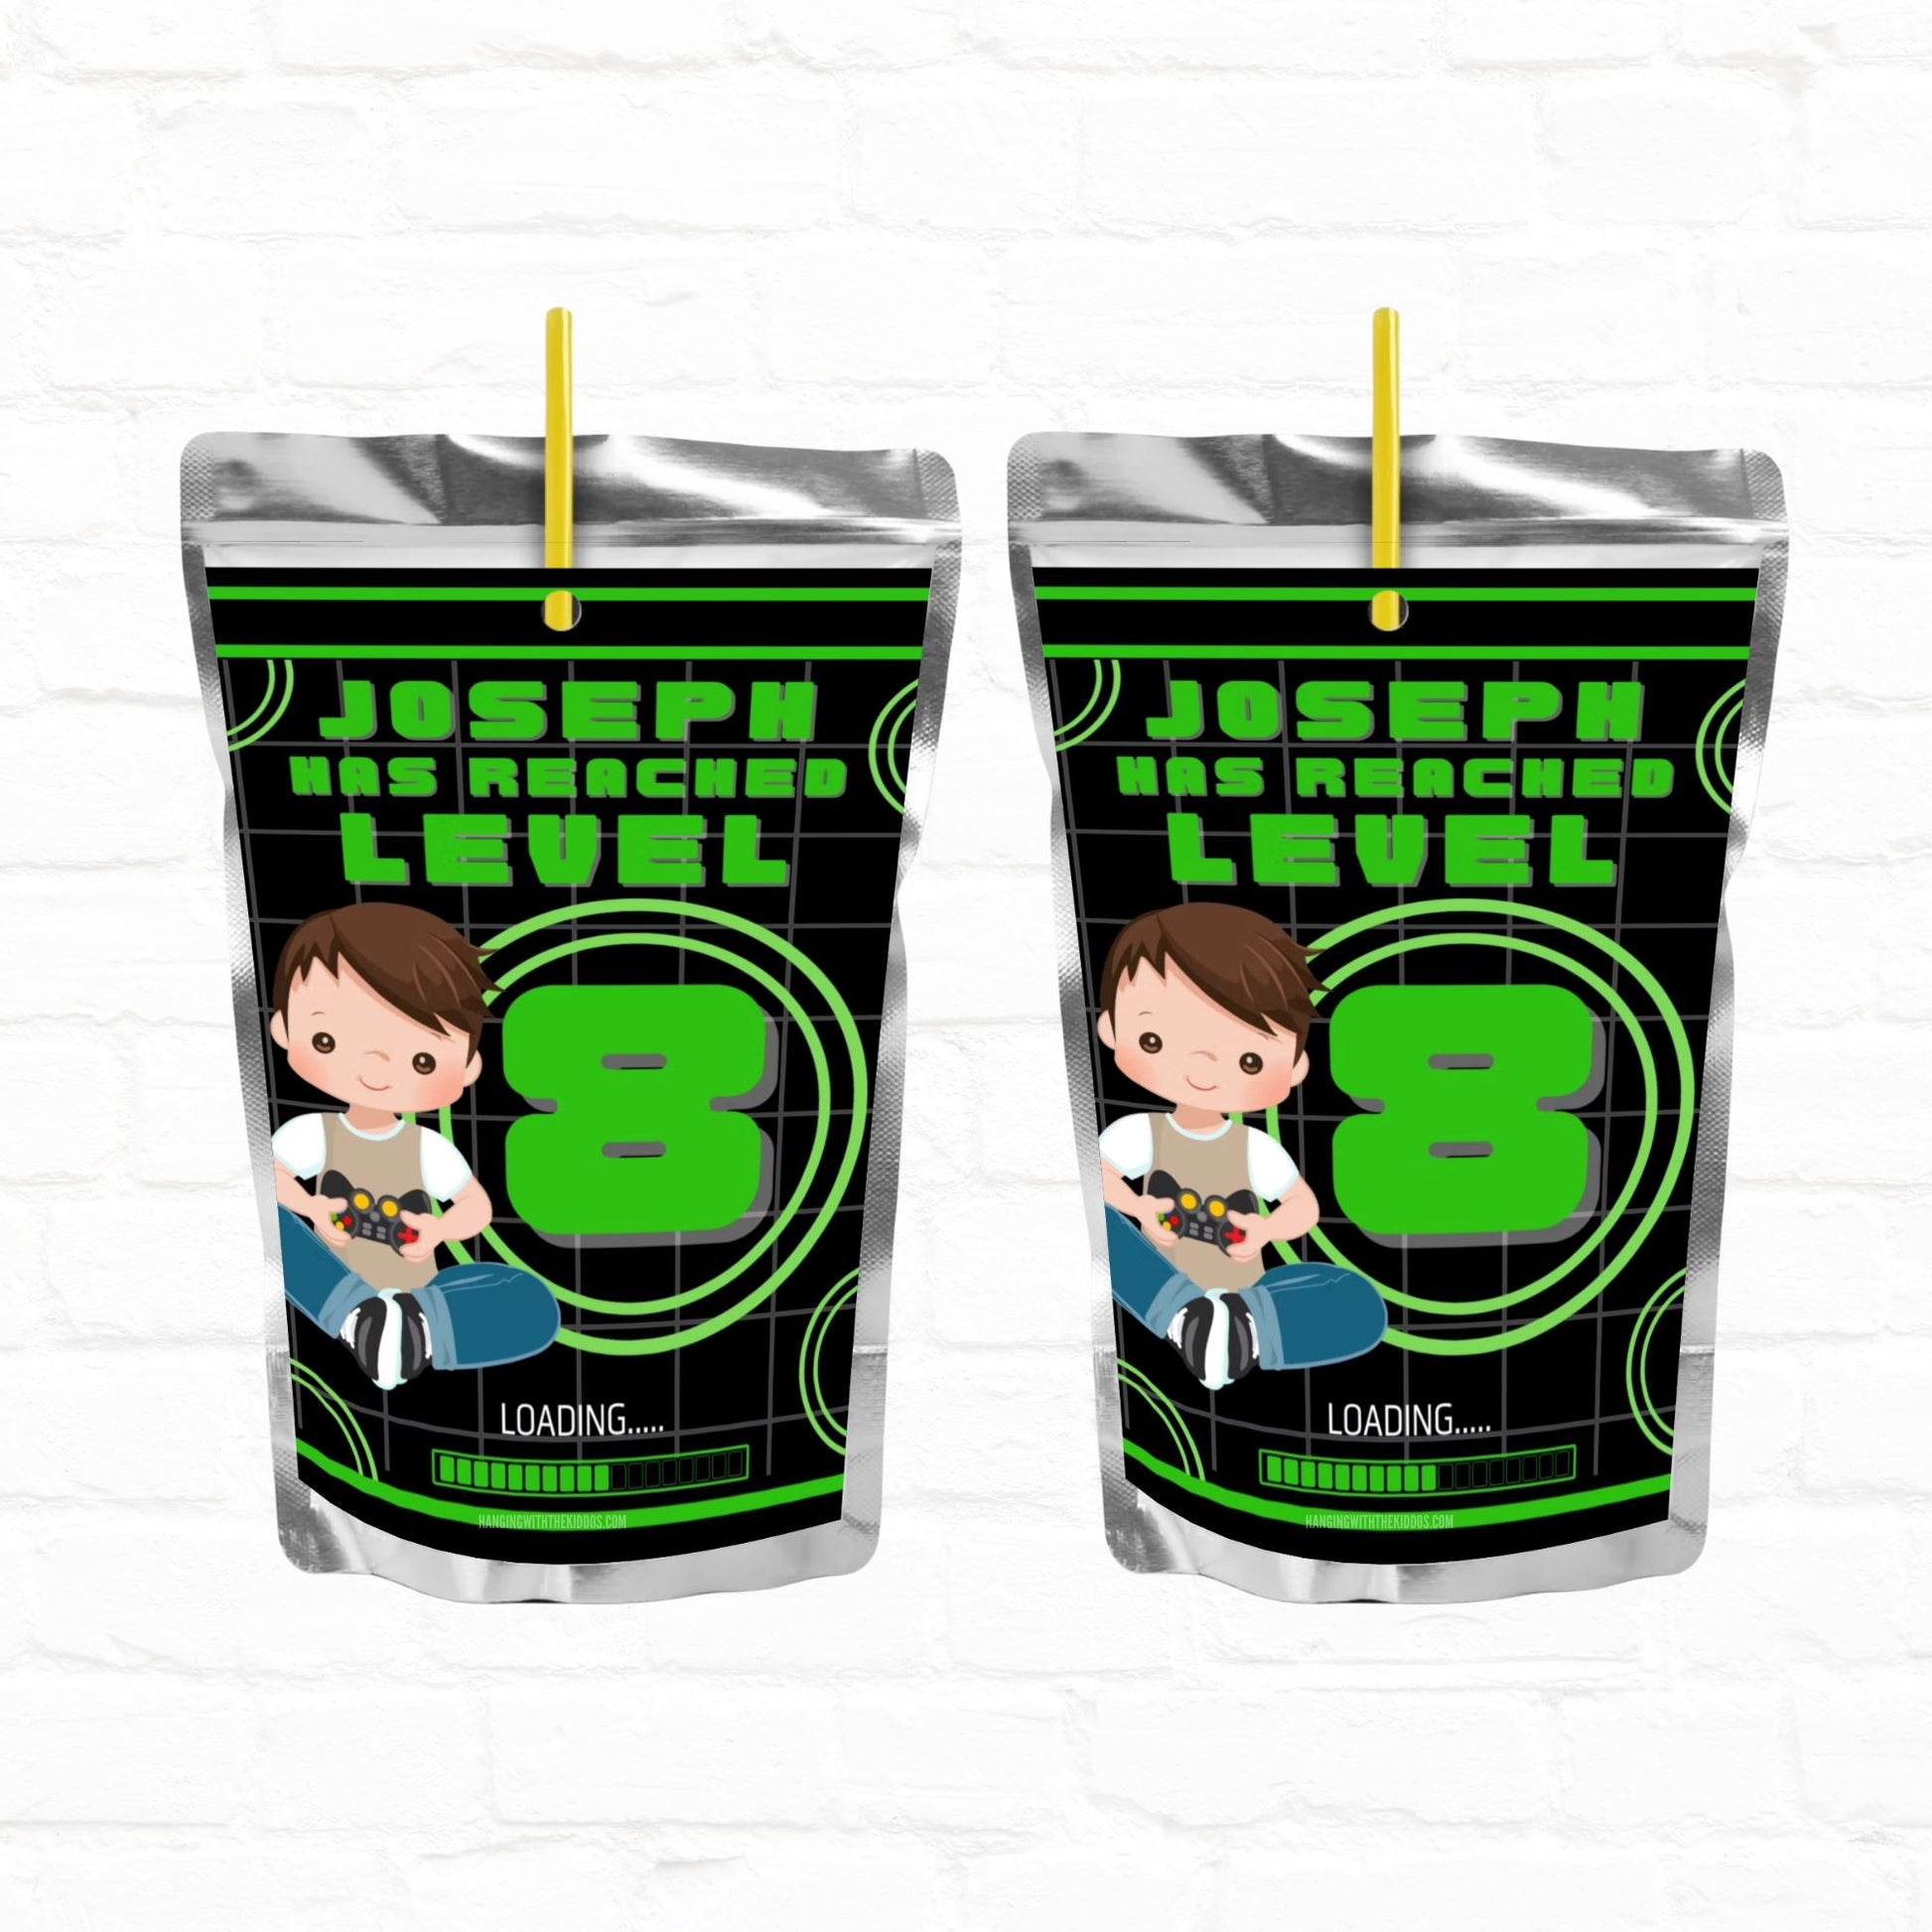 Video Game Birthday Party Personalized Juice Pouch Labels| Instant Download 03